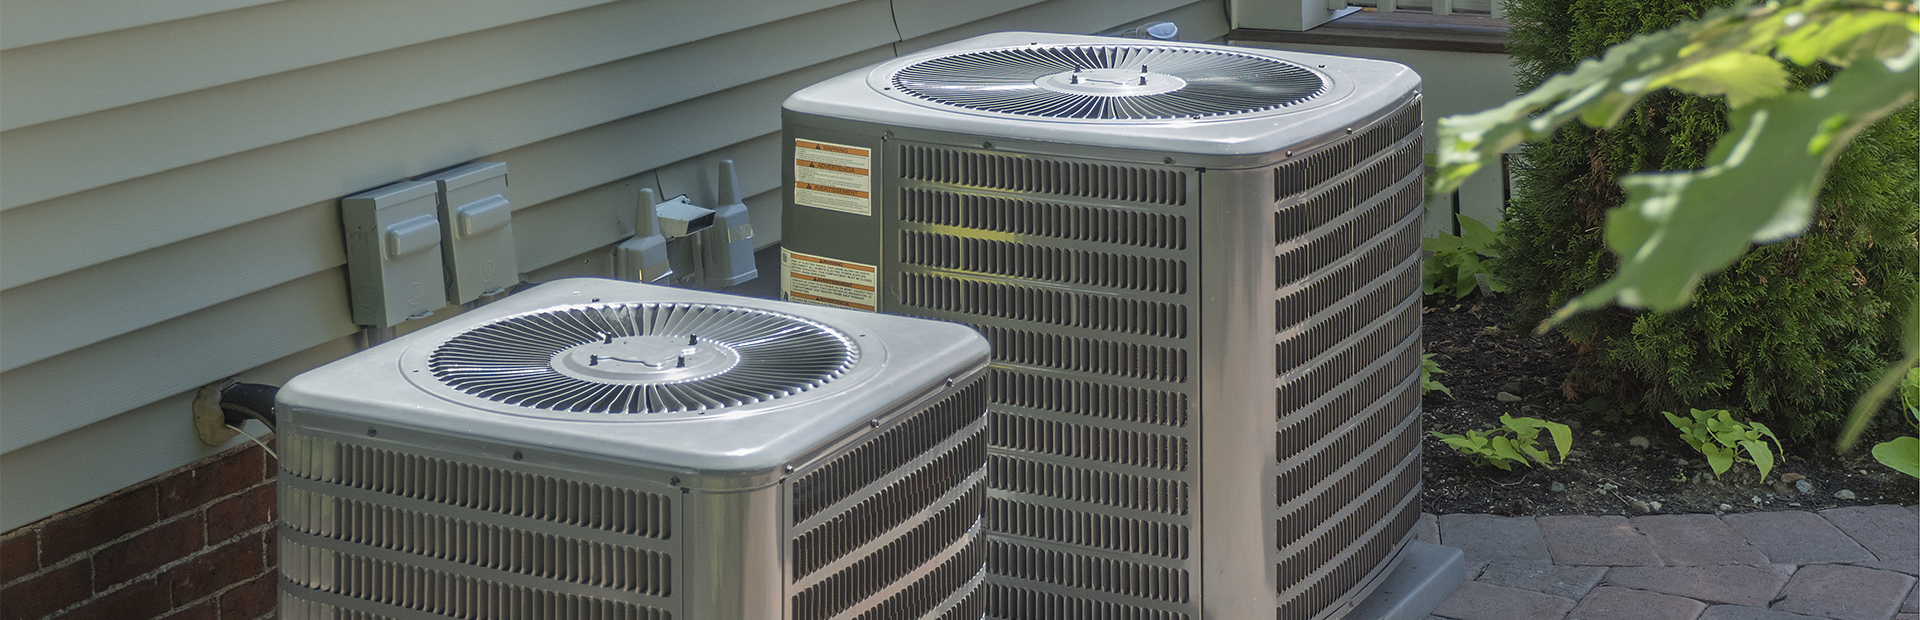 Featured image for “Common AC Problems Homeowners Face in The Summer”